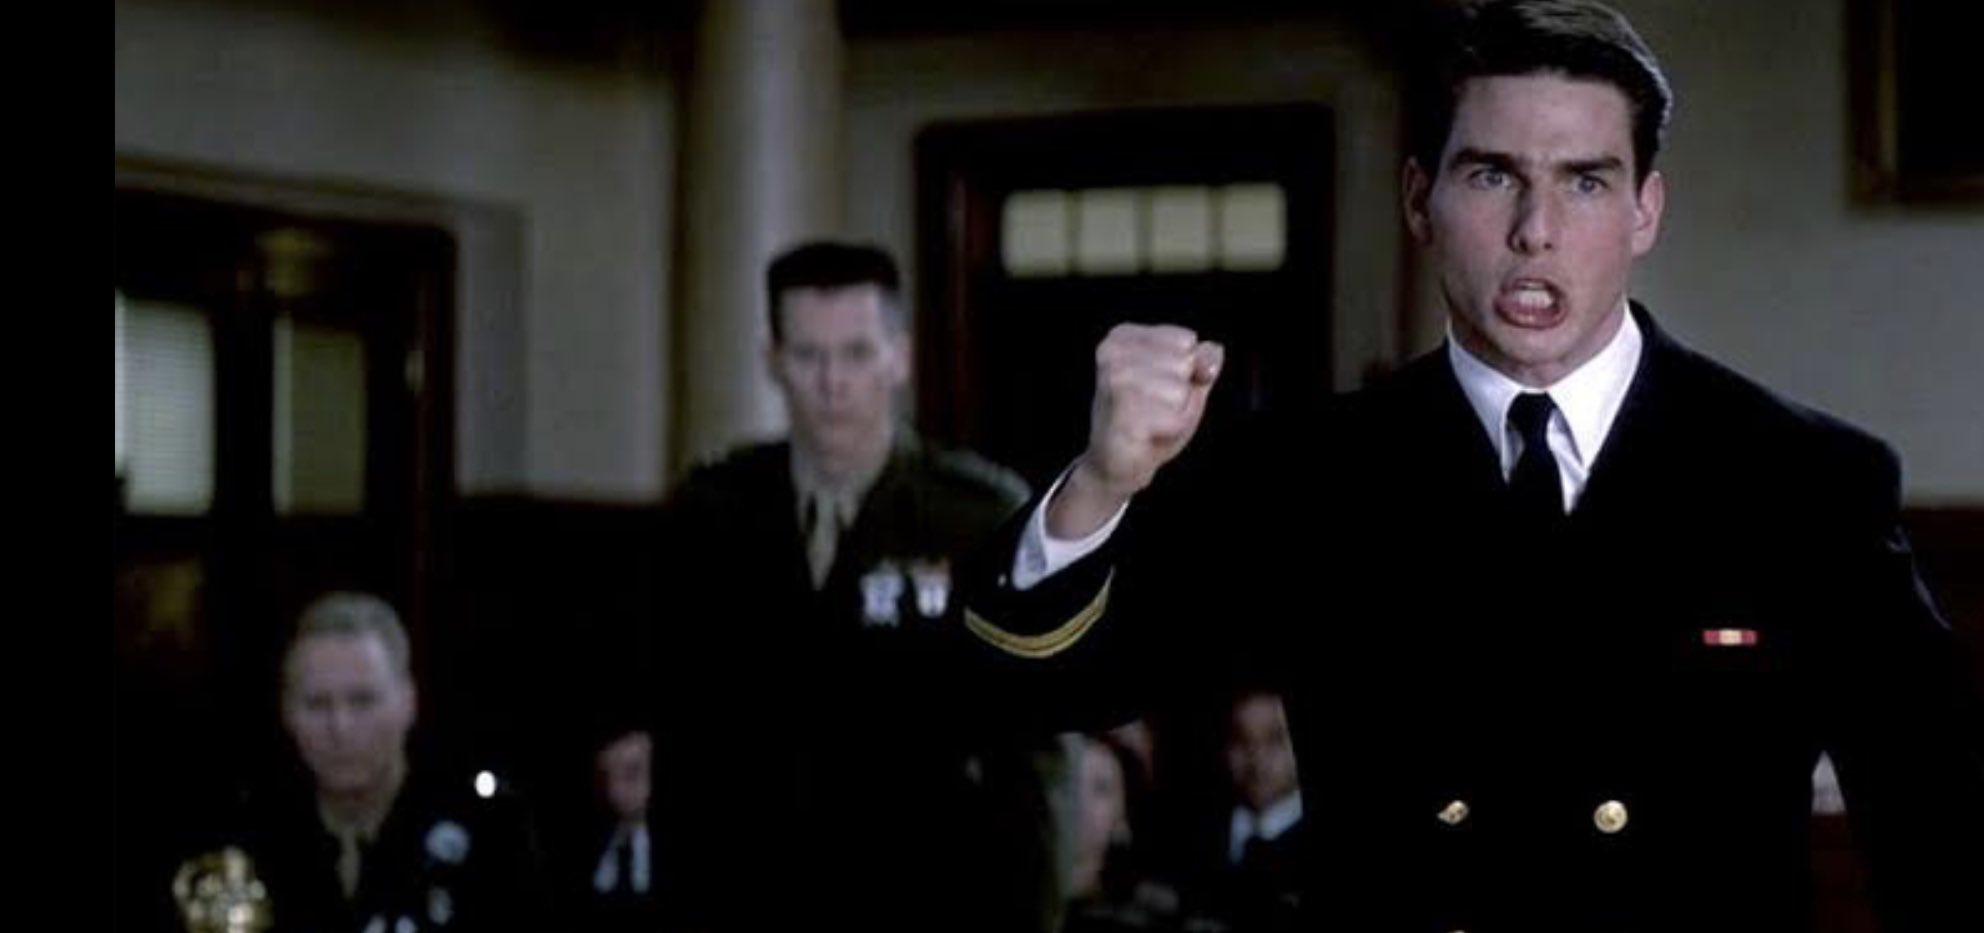 Lil udmelding Finde på sanjoy ghose on Twitter: "Law Twitter quote tweet your most favourite Court  Room Movie Scene! Here is mine: “Did you order the Code Red?” A Few Good Men,  1992 https://t.co/FO5rQwCp2p" / Twitter